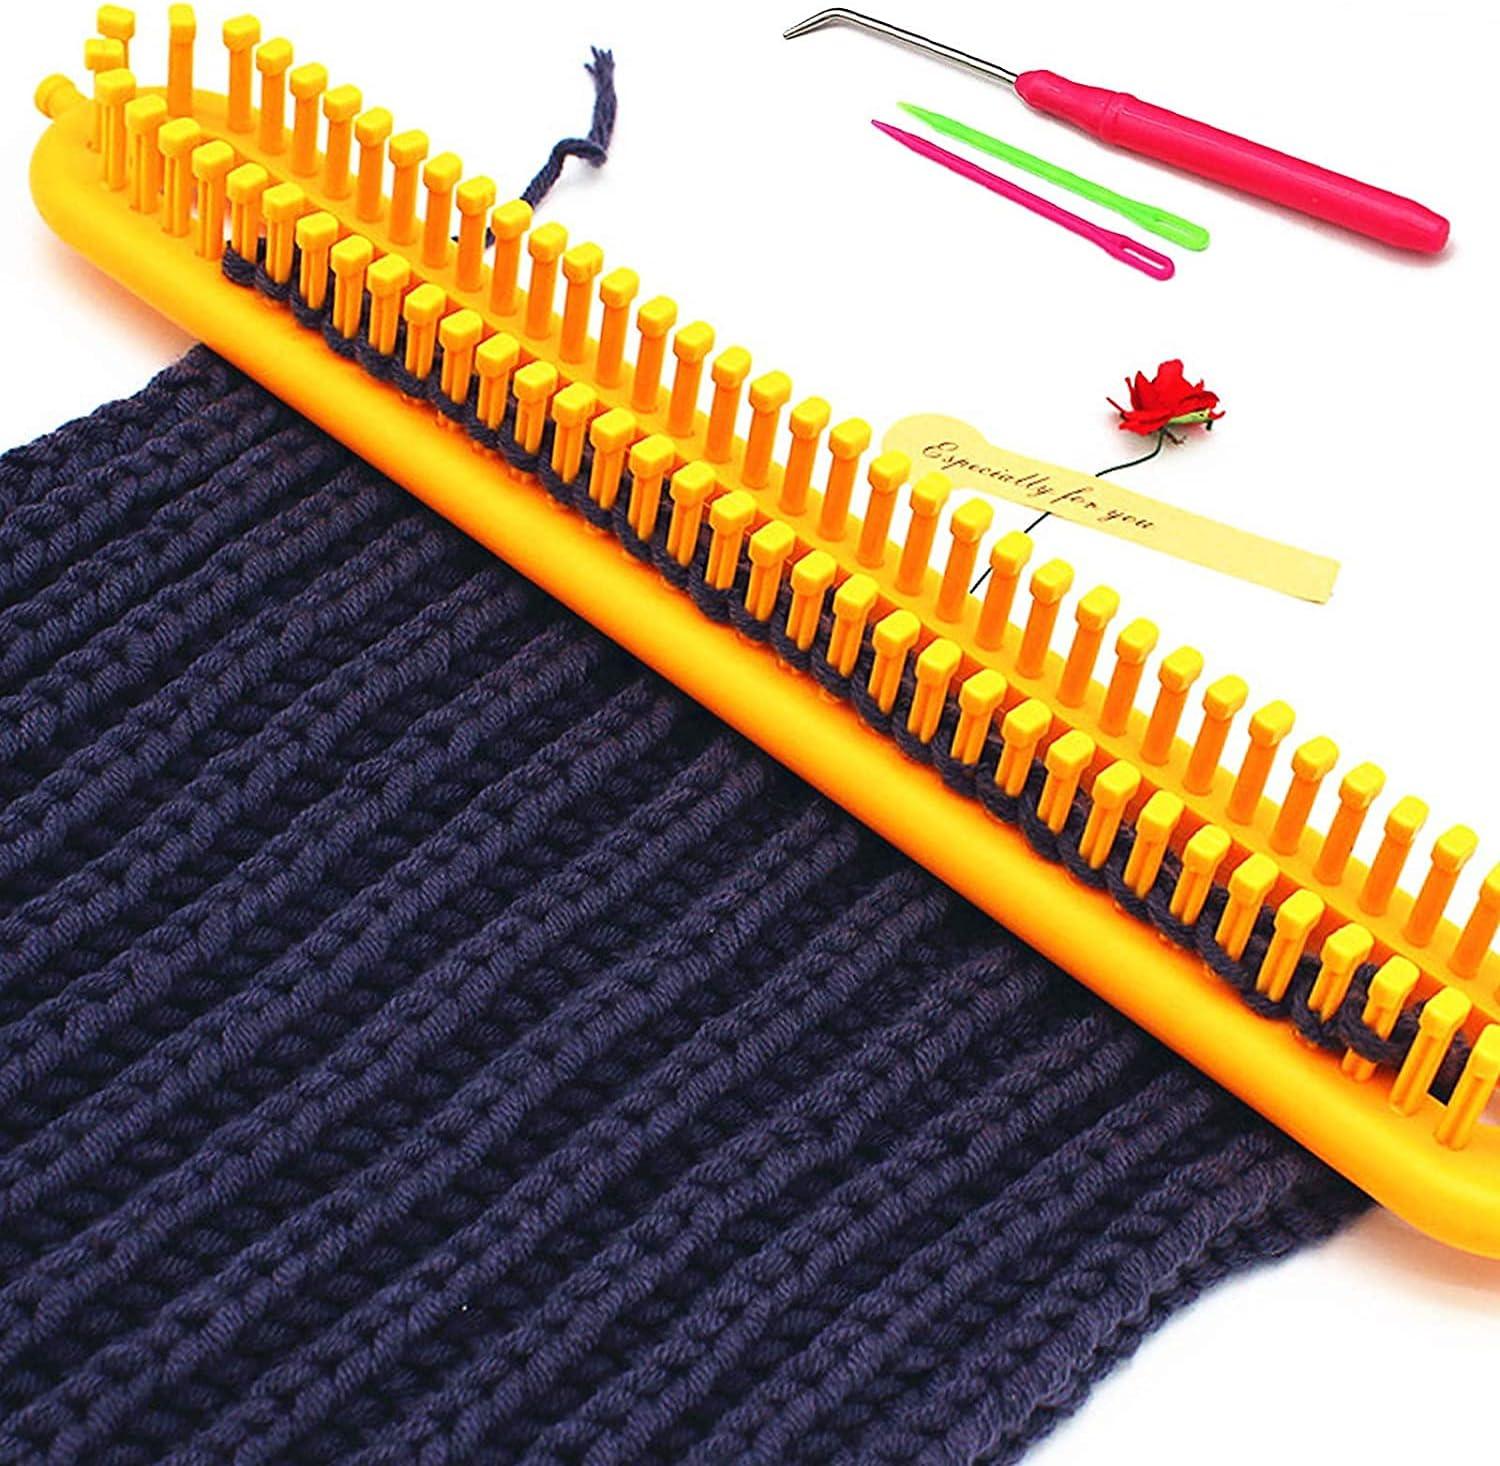 Katech Round Knitting Looms Set 29 cm Diameter Yellow Plastic Weaving Looms  Scarf Hats Making Tools DIY Crocheting Handmade Craft Kit with a Crochet